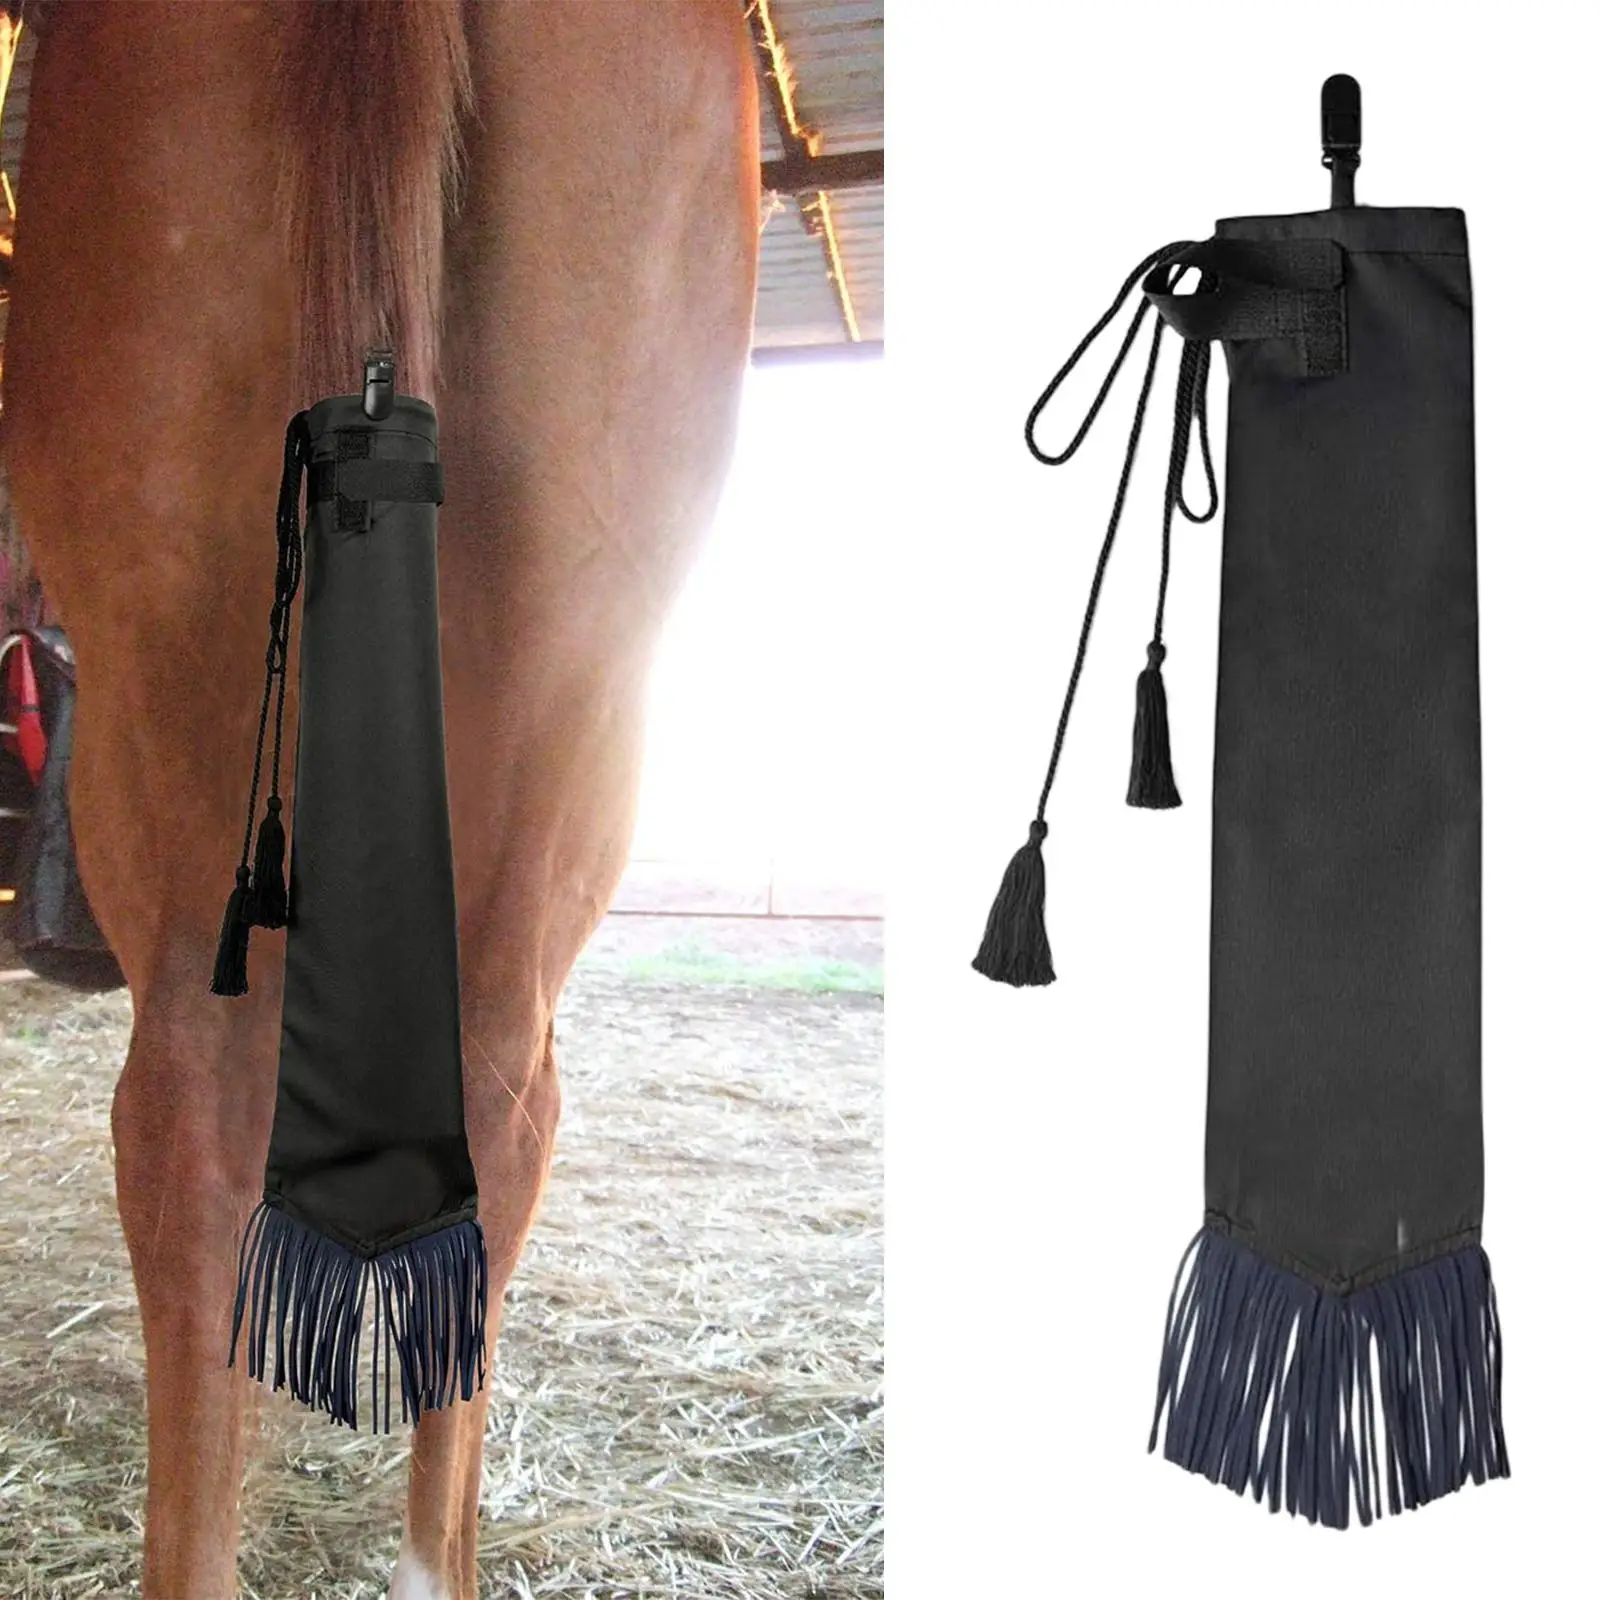 Horse Tail Bag with Fringe, Tail Bags for Horses, Black